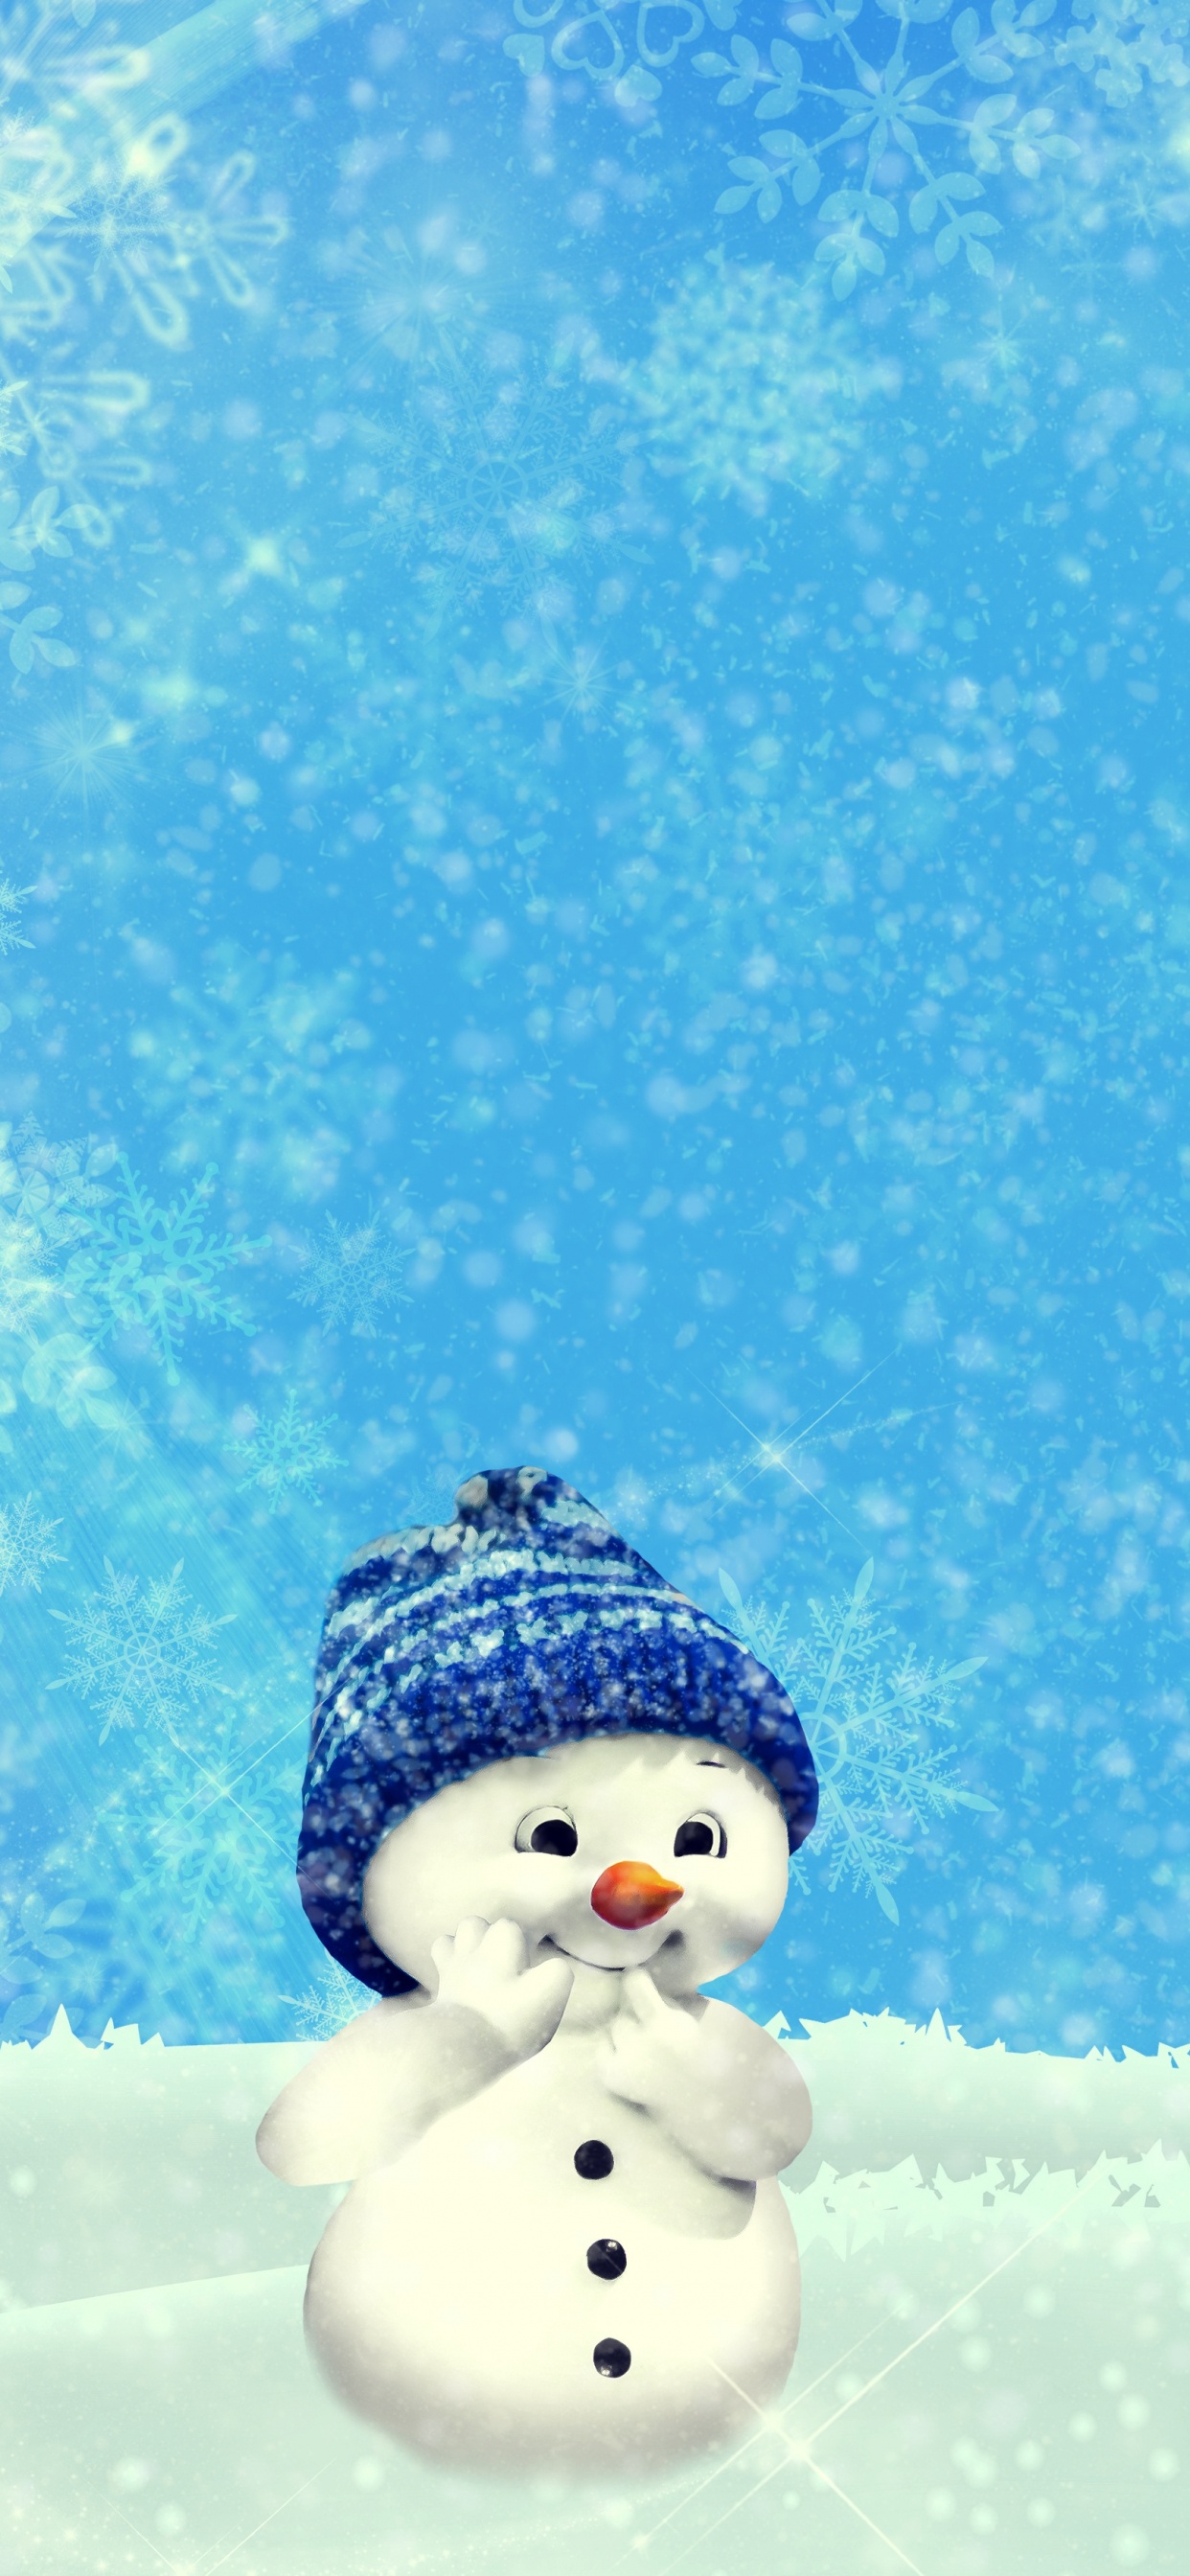 Snowman, Christmas Day, Snow, Winter, Freezing. Wallpaper in 1242x2688 Resolution